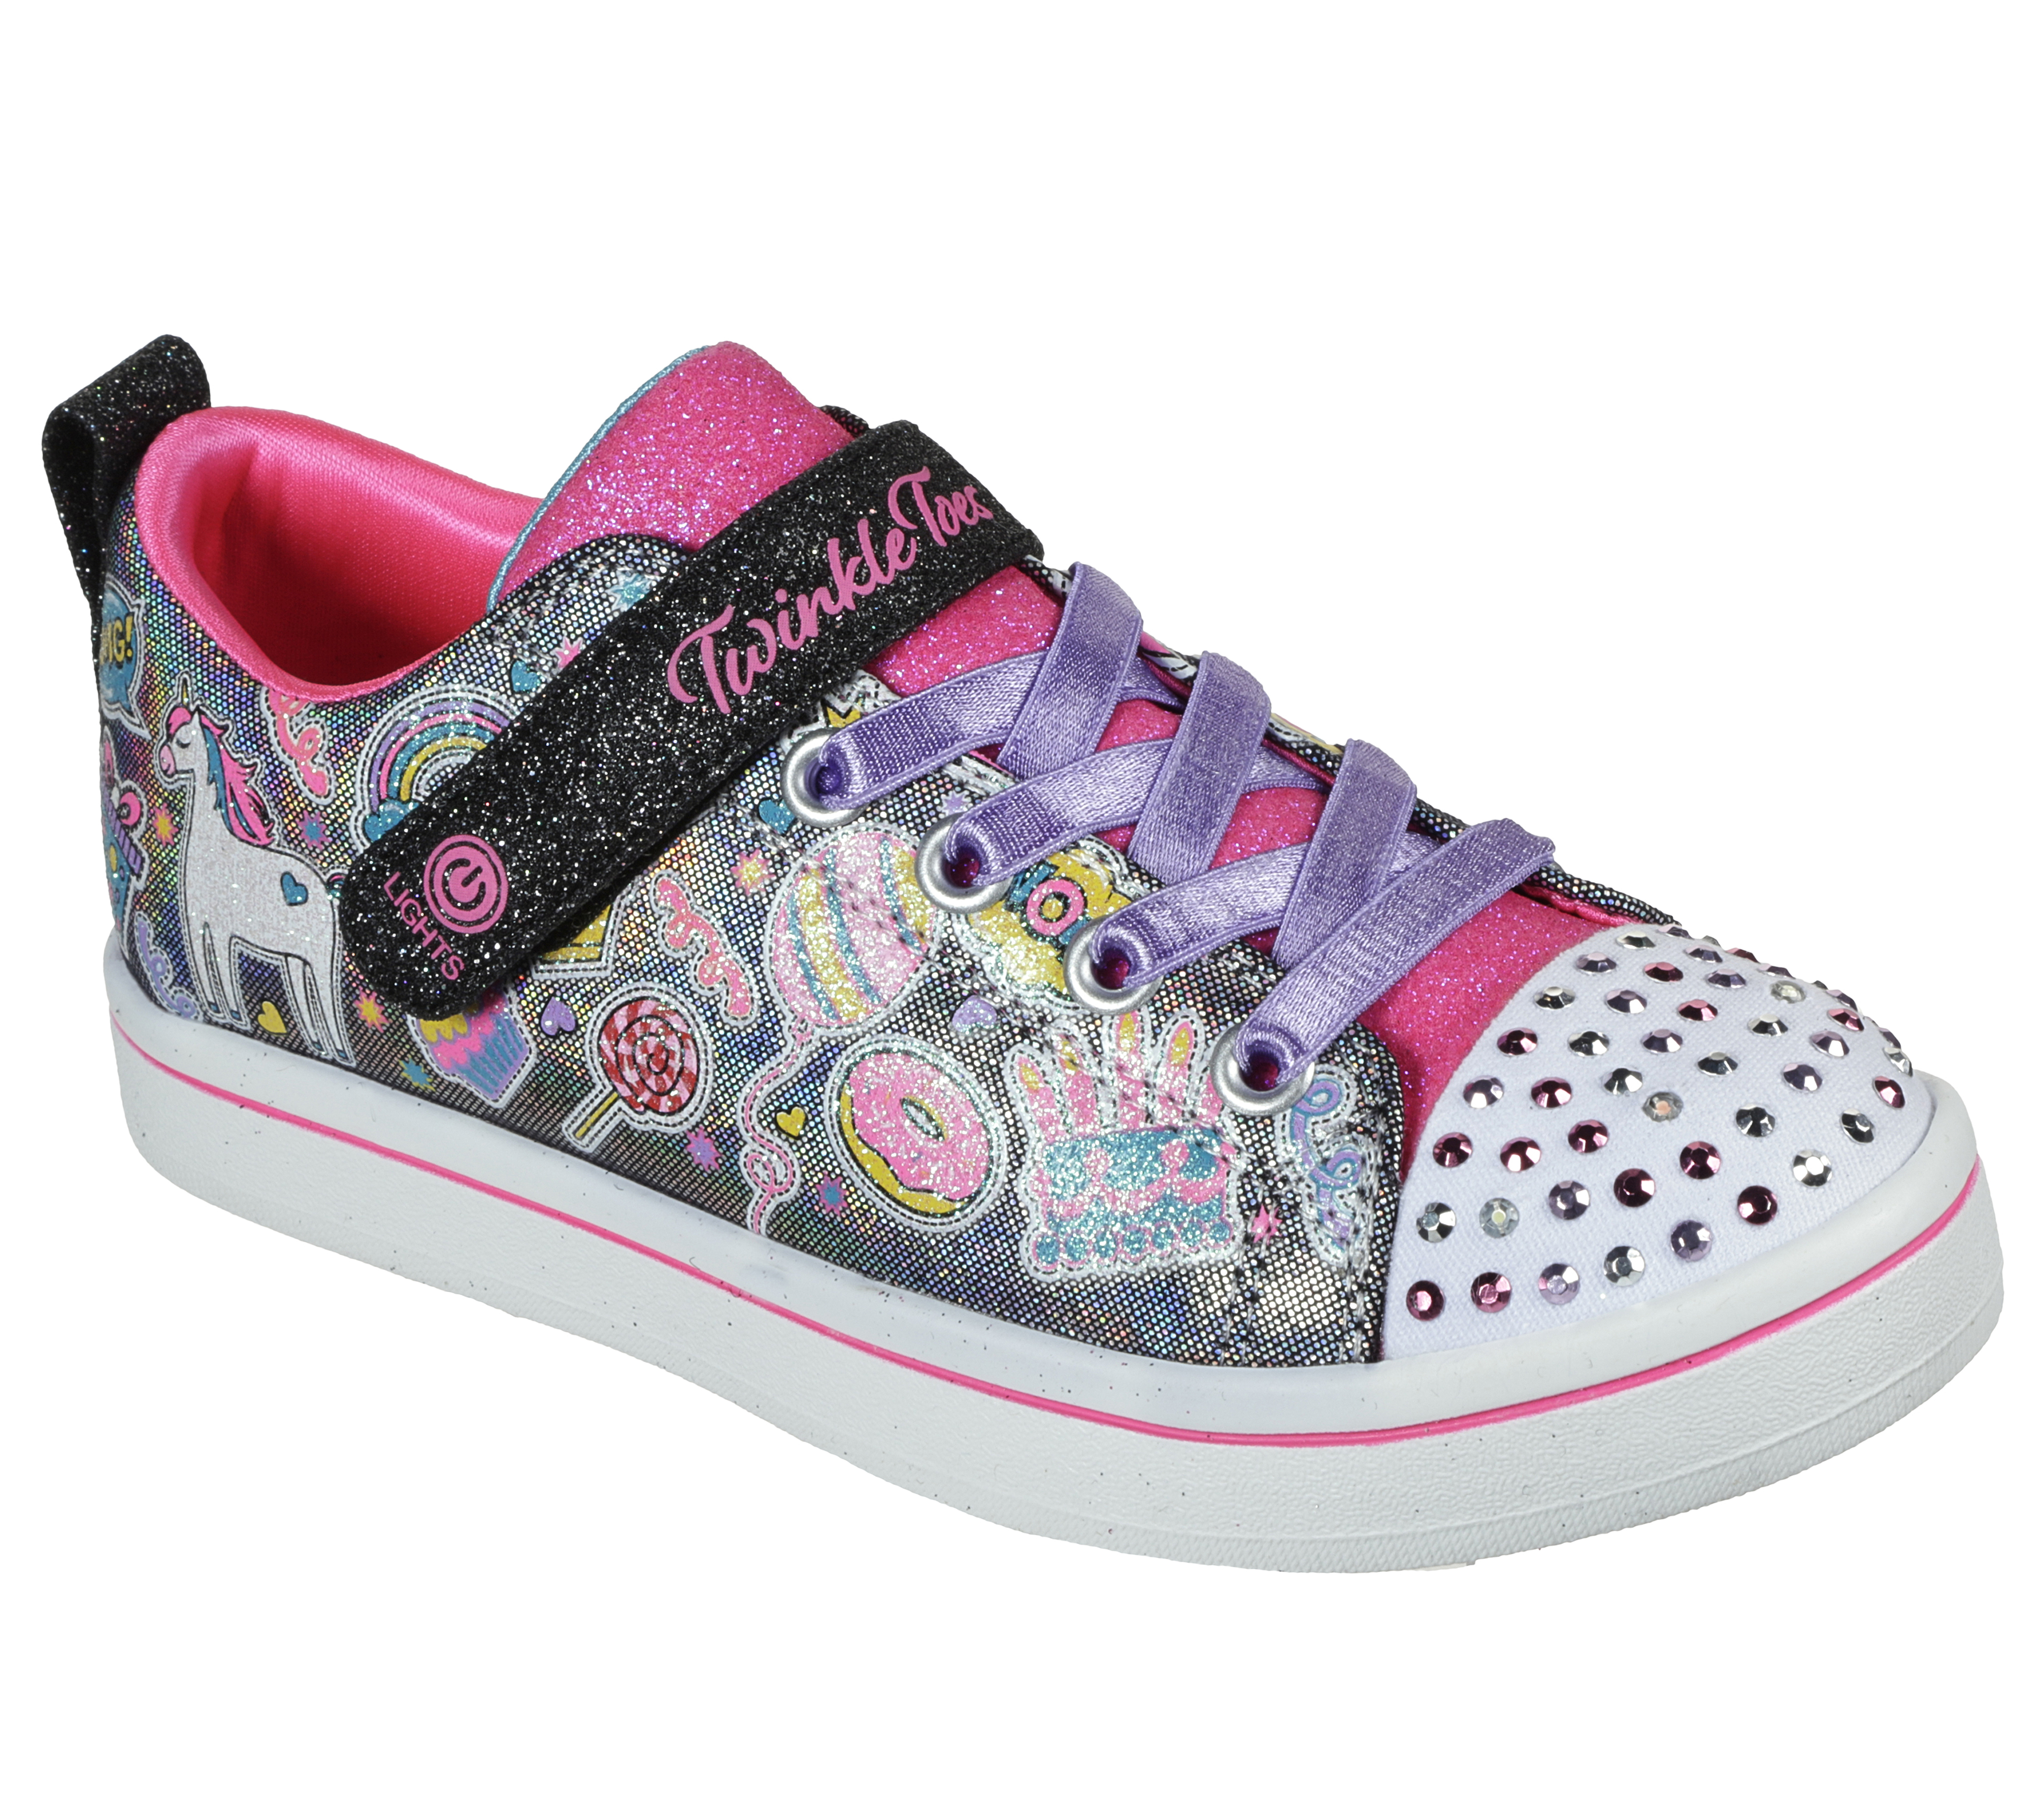 skechers childrens shoes twinkle toes